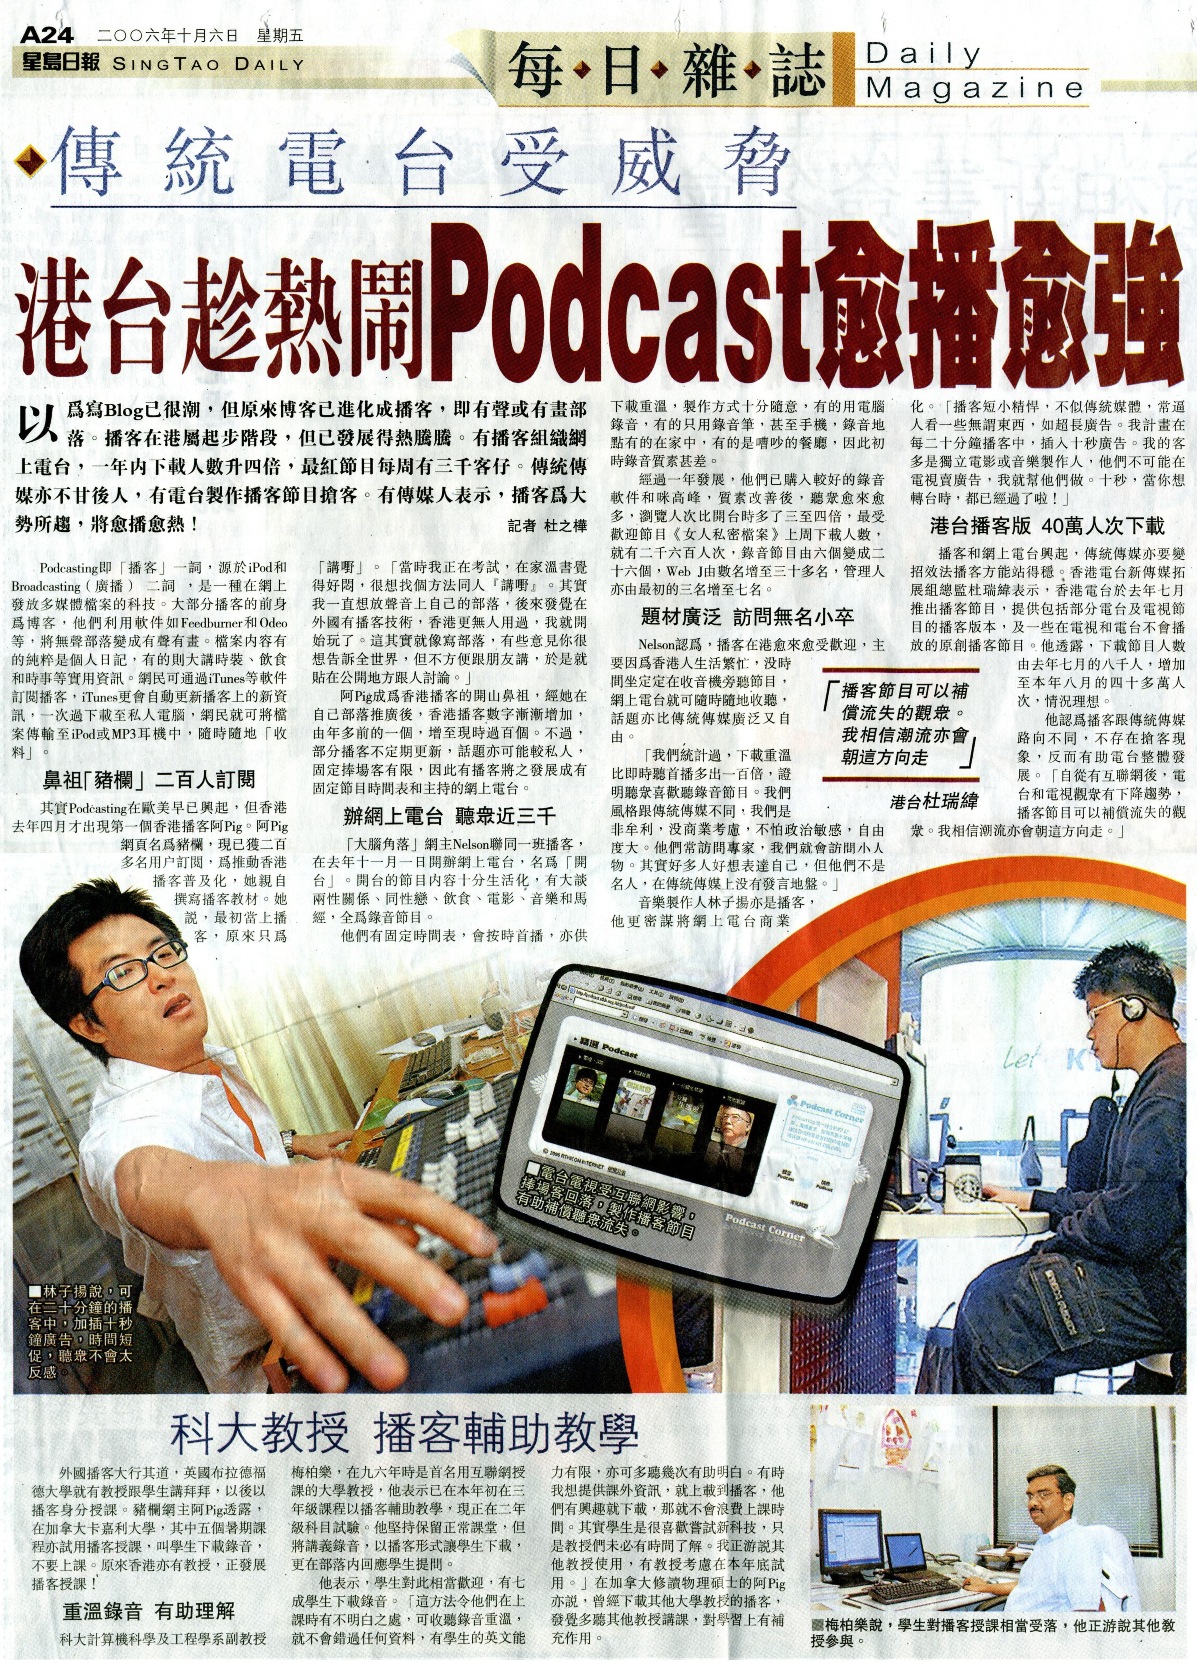 Sing Tao News Daily on 6 Oct. 2006